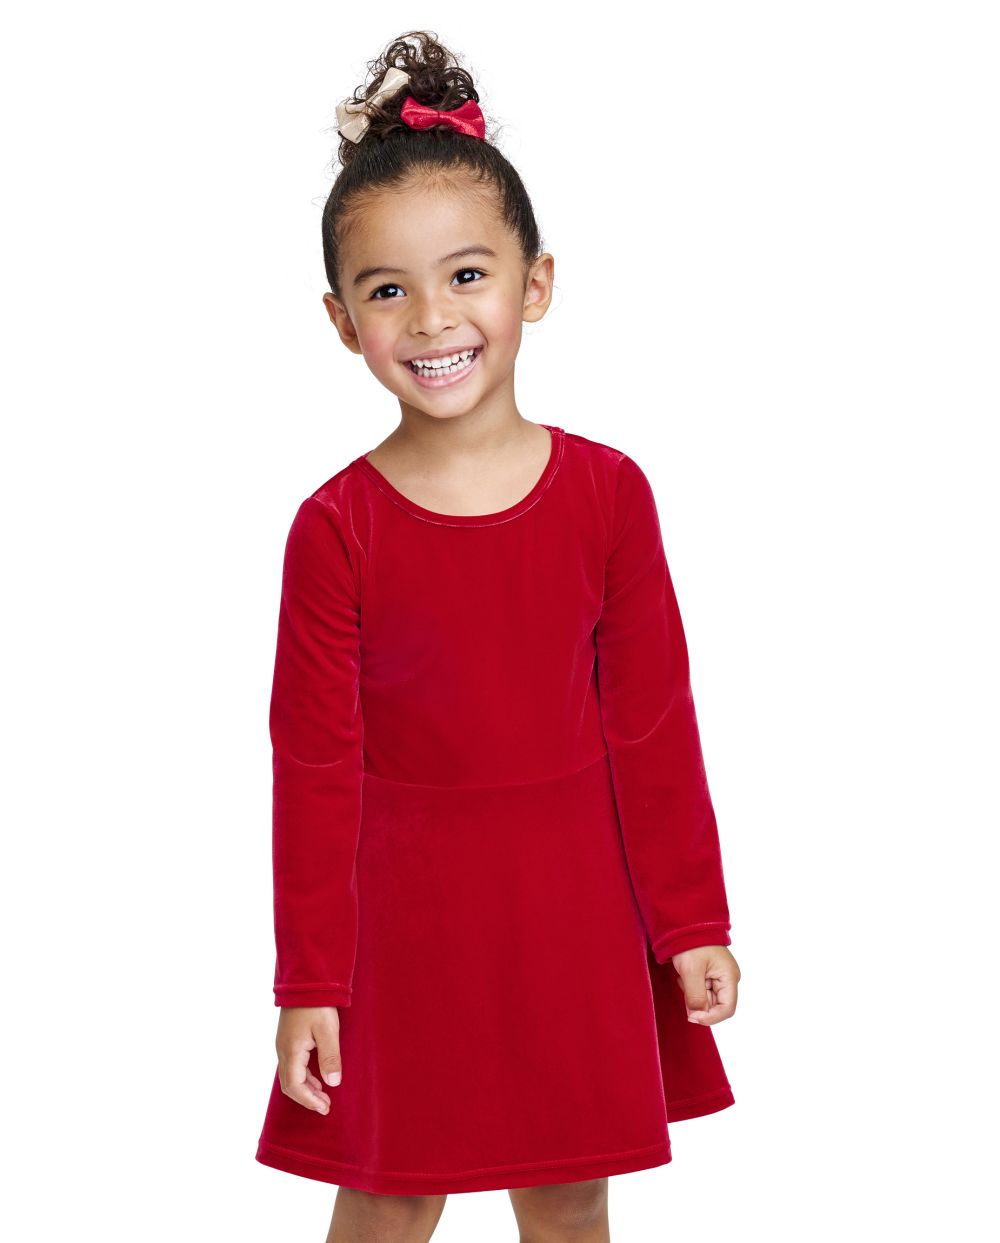 Toddler Baby Cutout Long Sleeves Above the Knee Dress